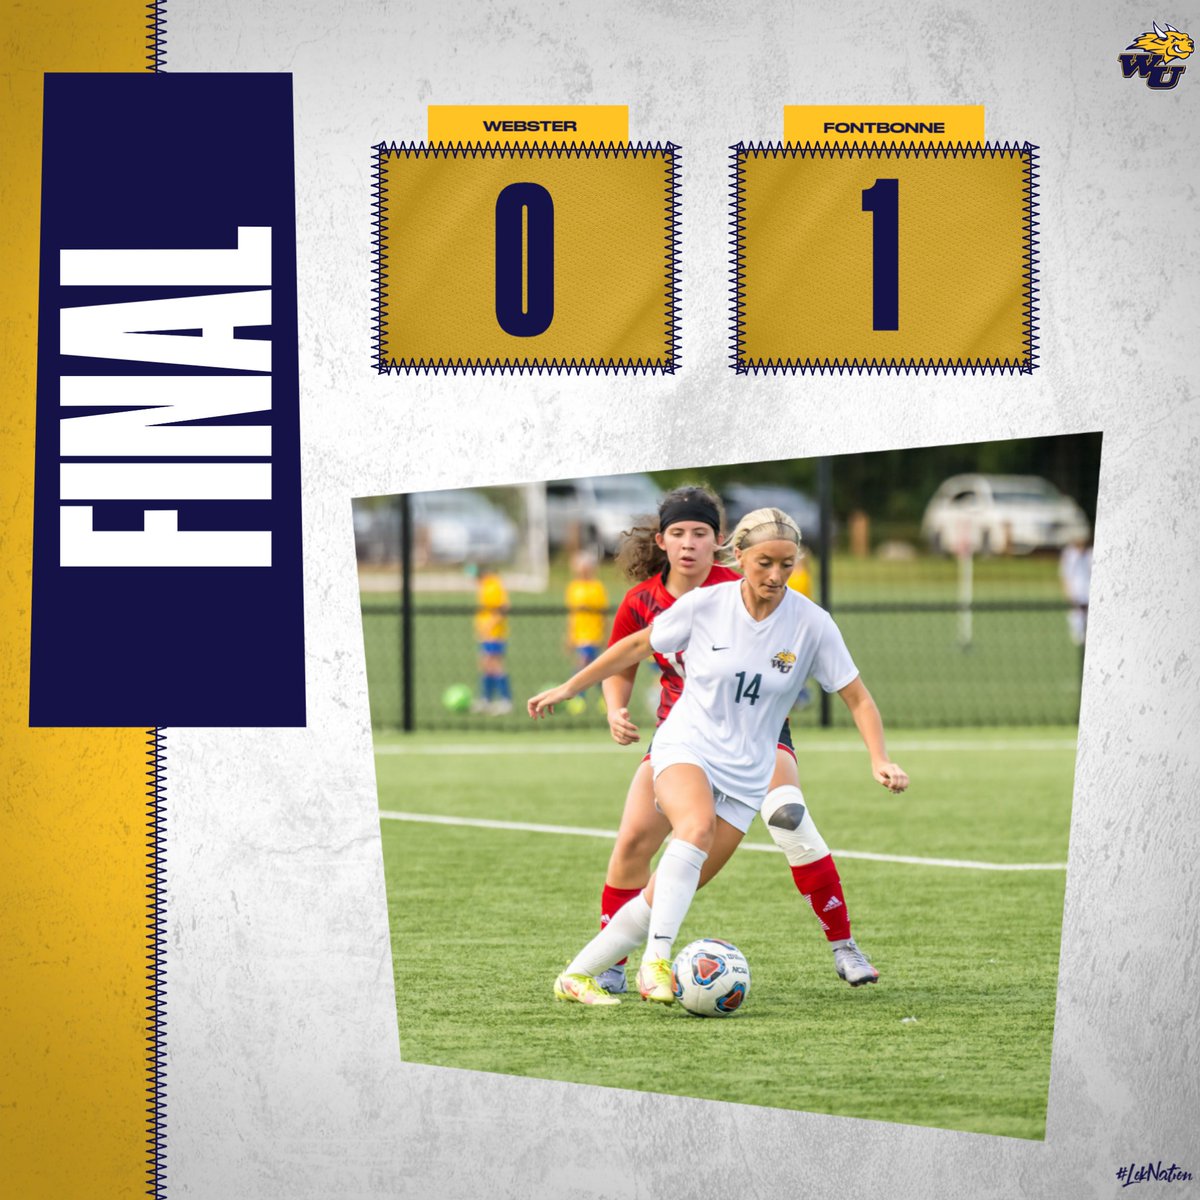 The @WebsterWSoccer team fell to Fontbonne this afternoon by a final score of 1-0. They are back at home on Wednesday when they host the @GUPanthers for a @sliac matchup! @WebsterUNews #LokNation